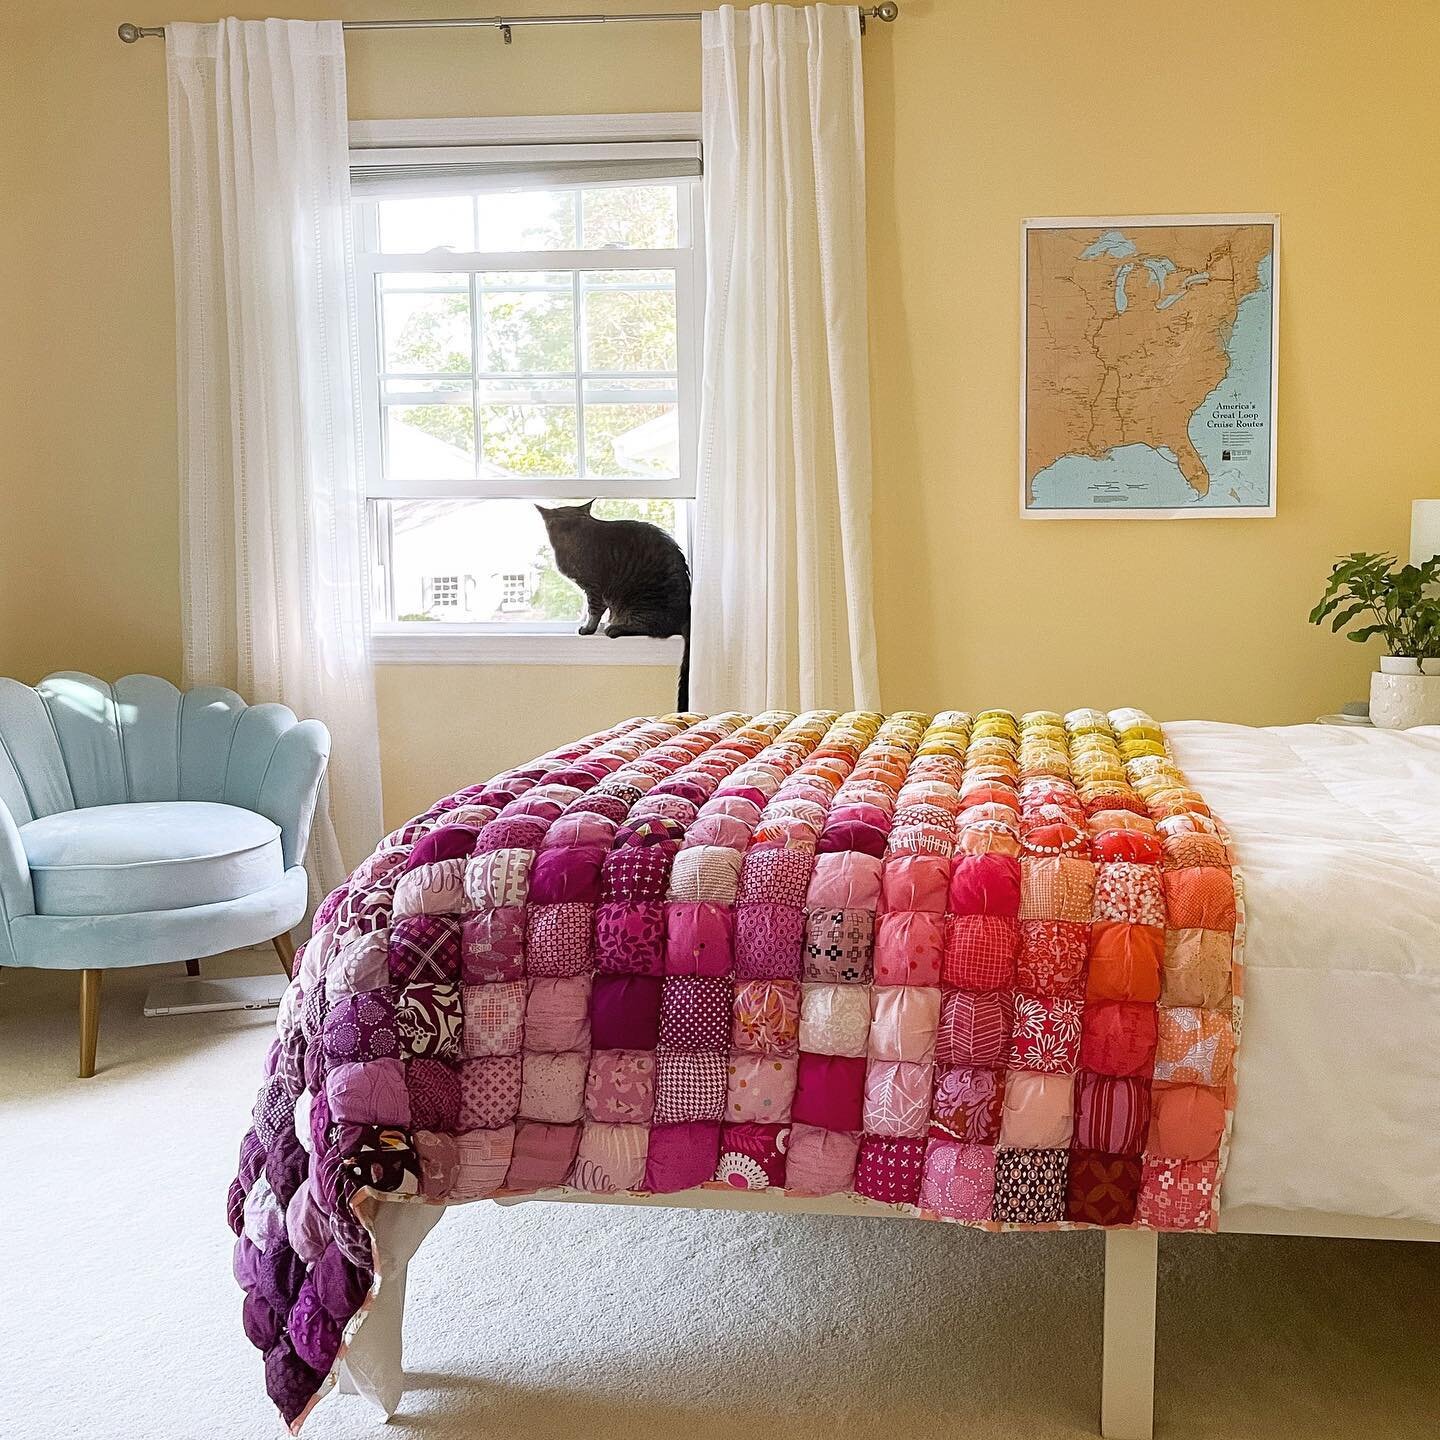 Remember when I decided I had to make a @loandbeholdstitchery Ombr&eacute; Puff Quilt for my daughter to take to camp? I was in such a rush to get it done that I never got any pictures of the finished quilt before it left for camp with her. But I fin